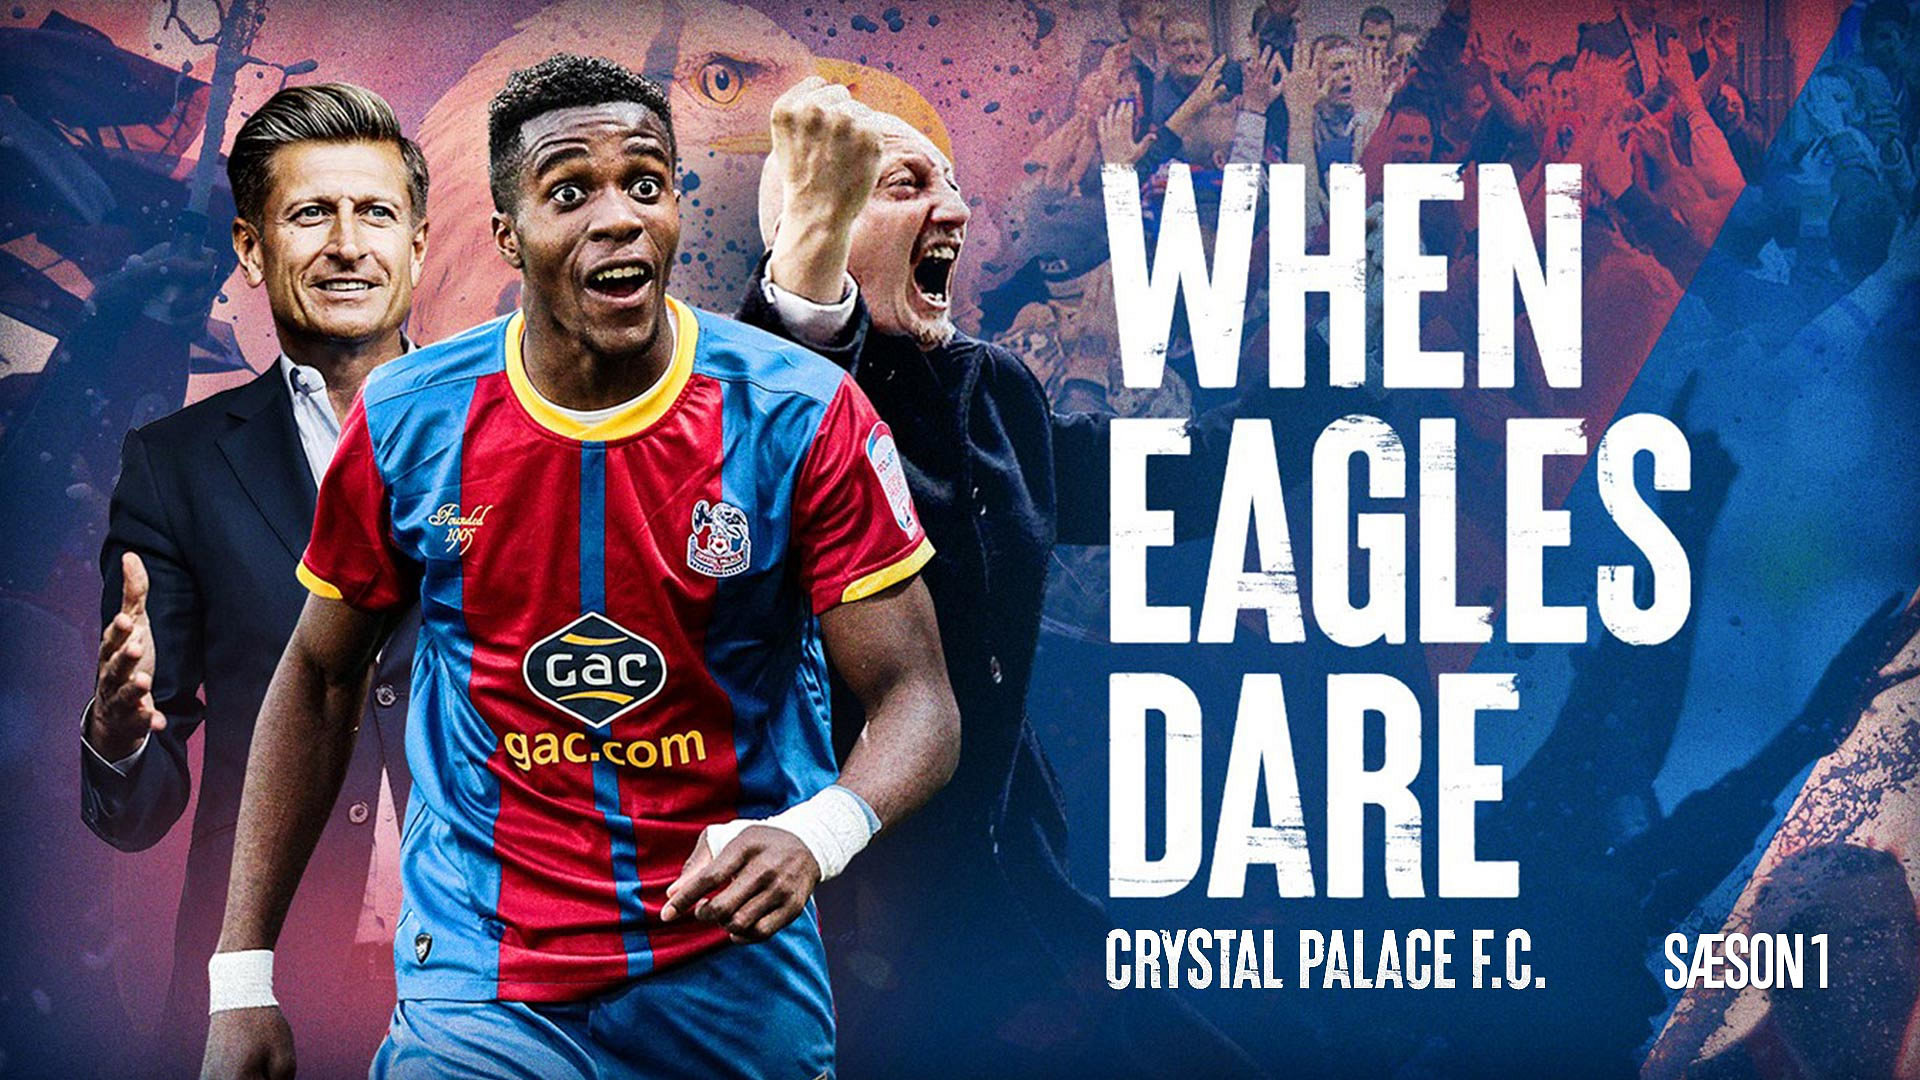 When Eagles Dare: Crystal Palace F.C. - Trailer